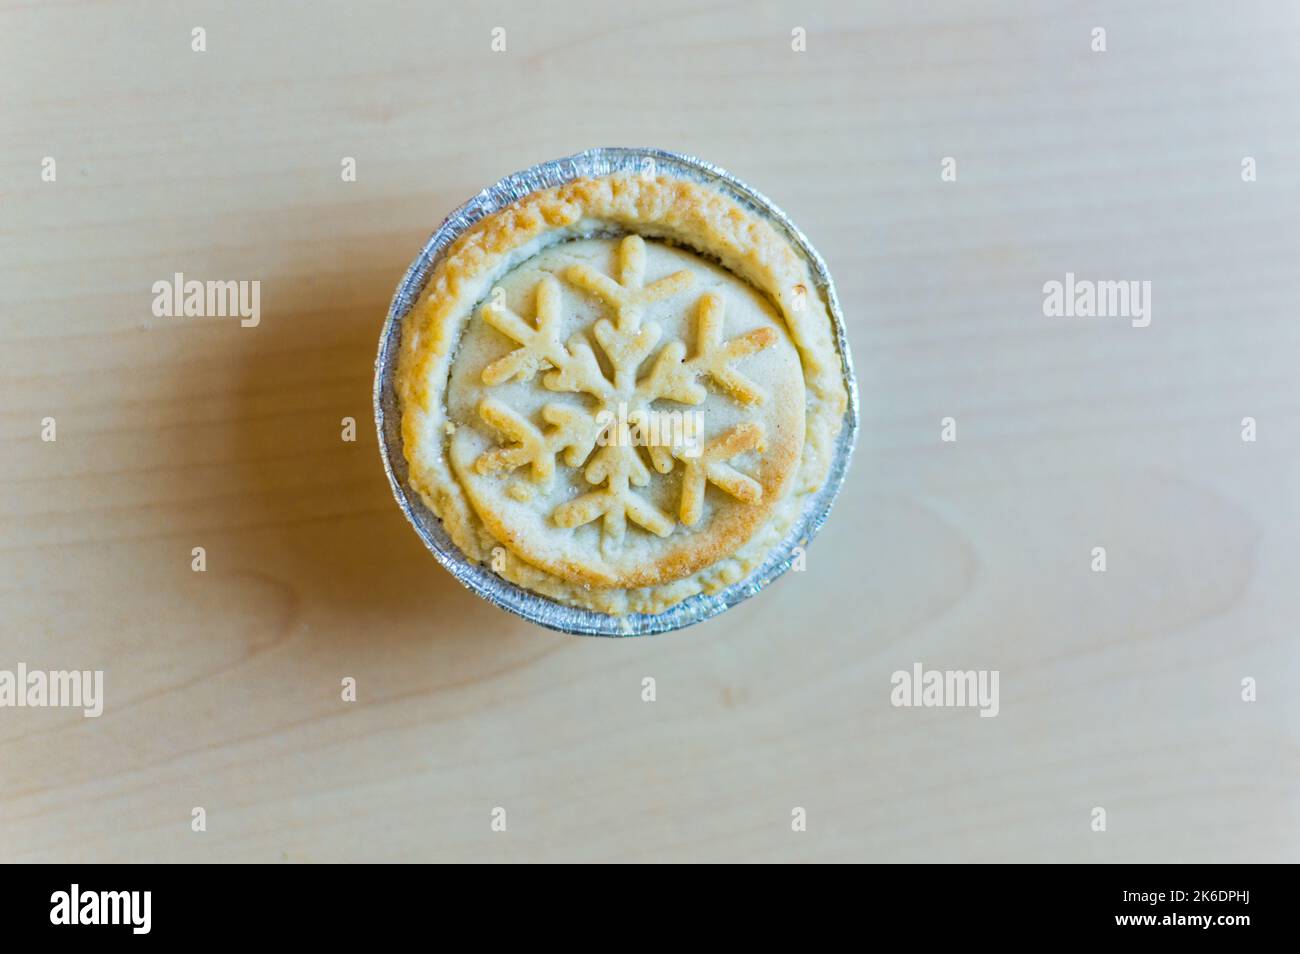 Isolated minced pie with festival decoration Stock Photo